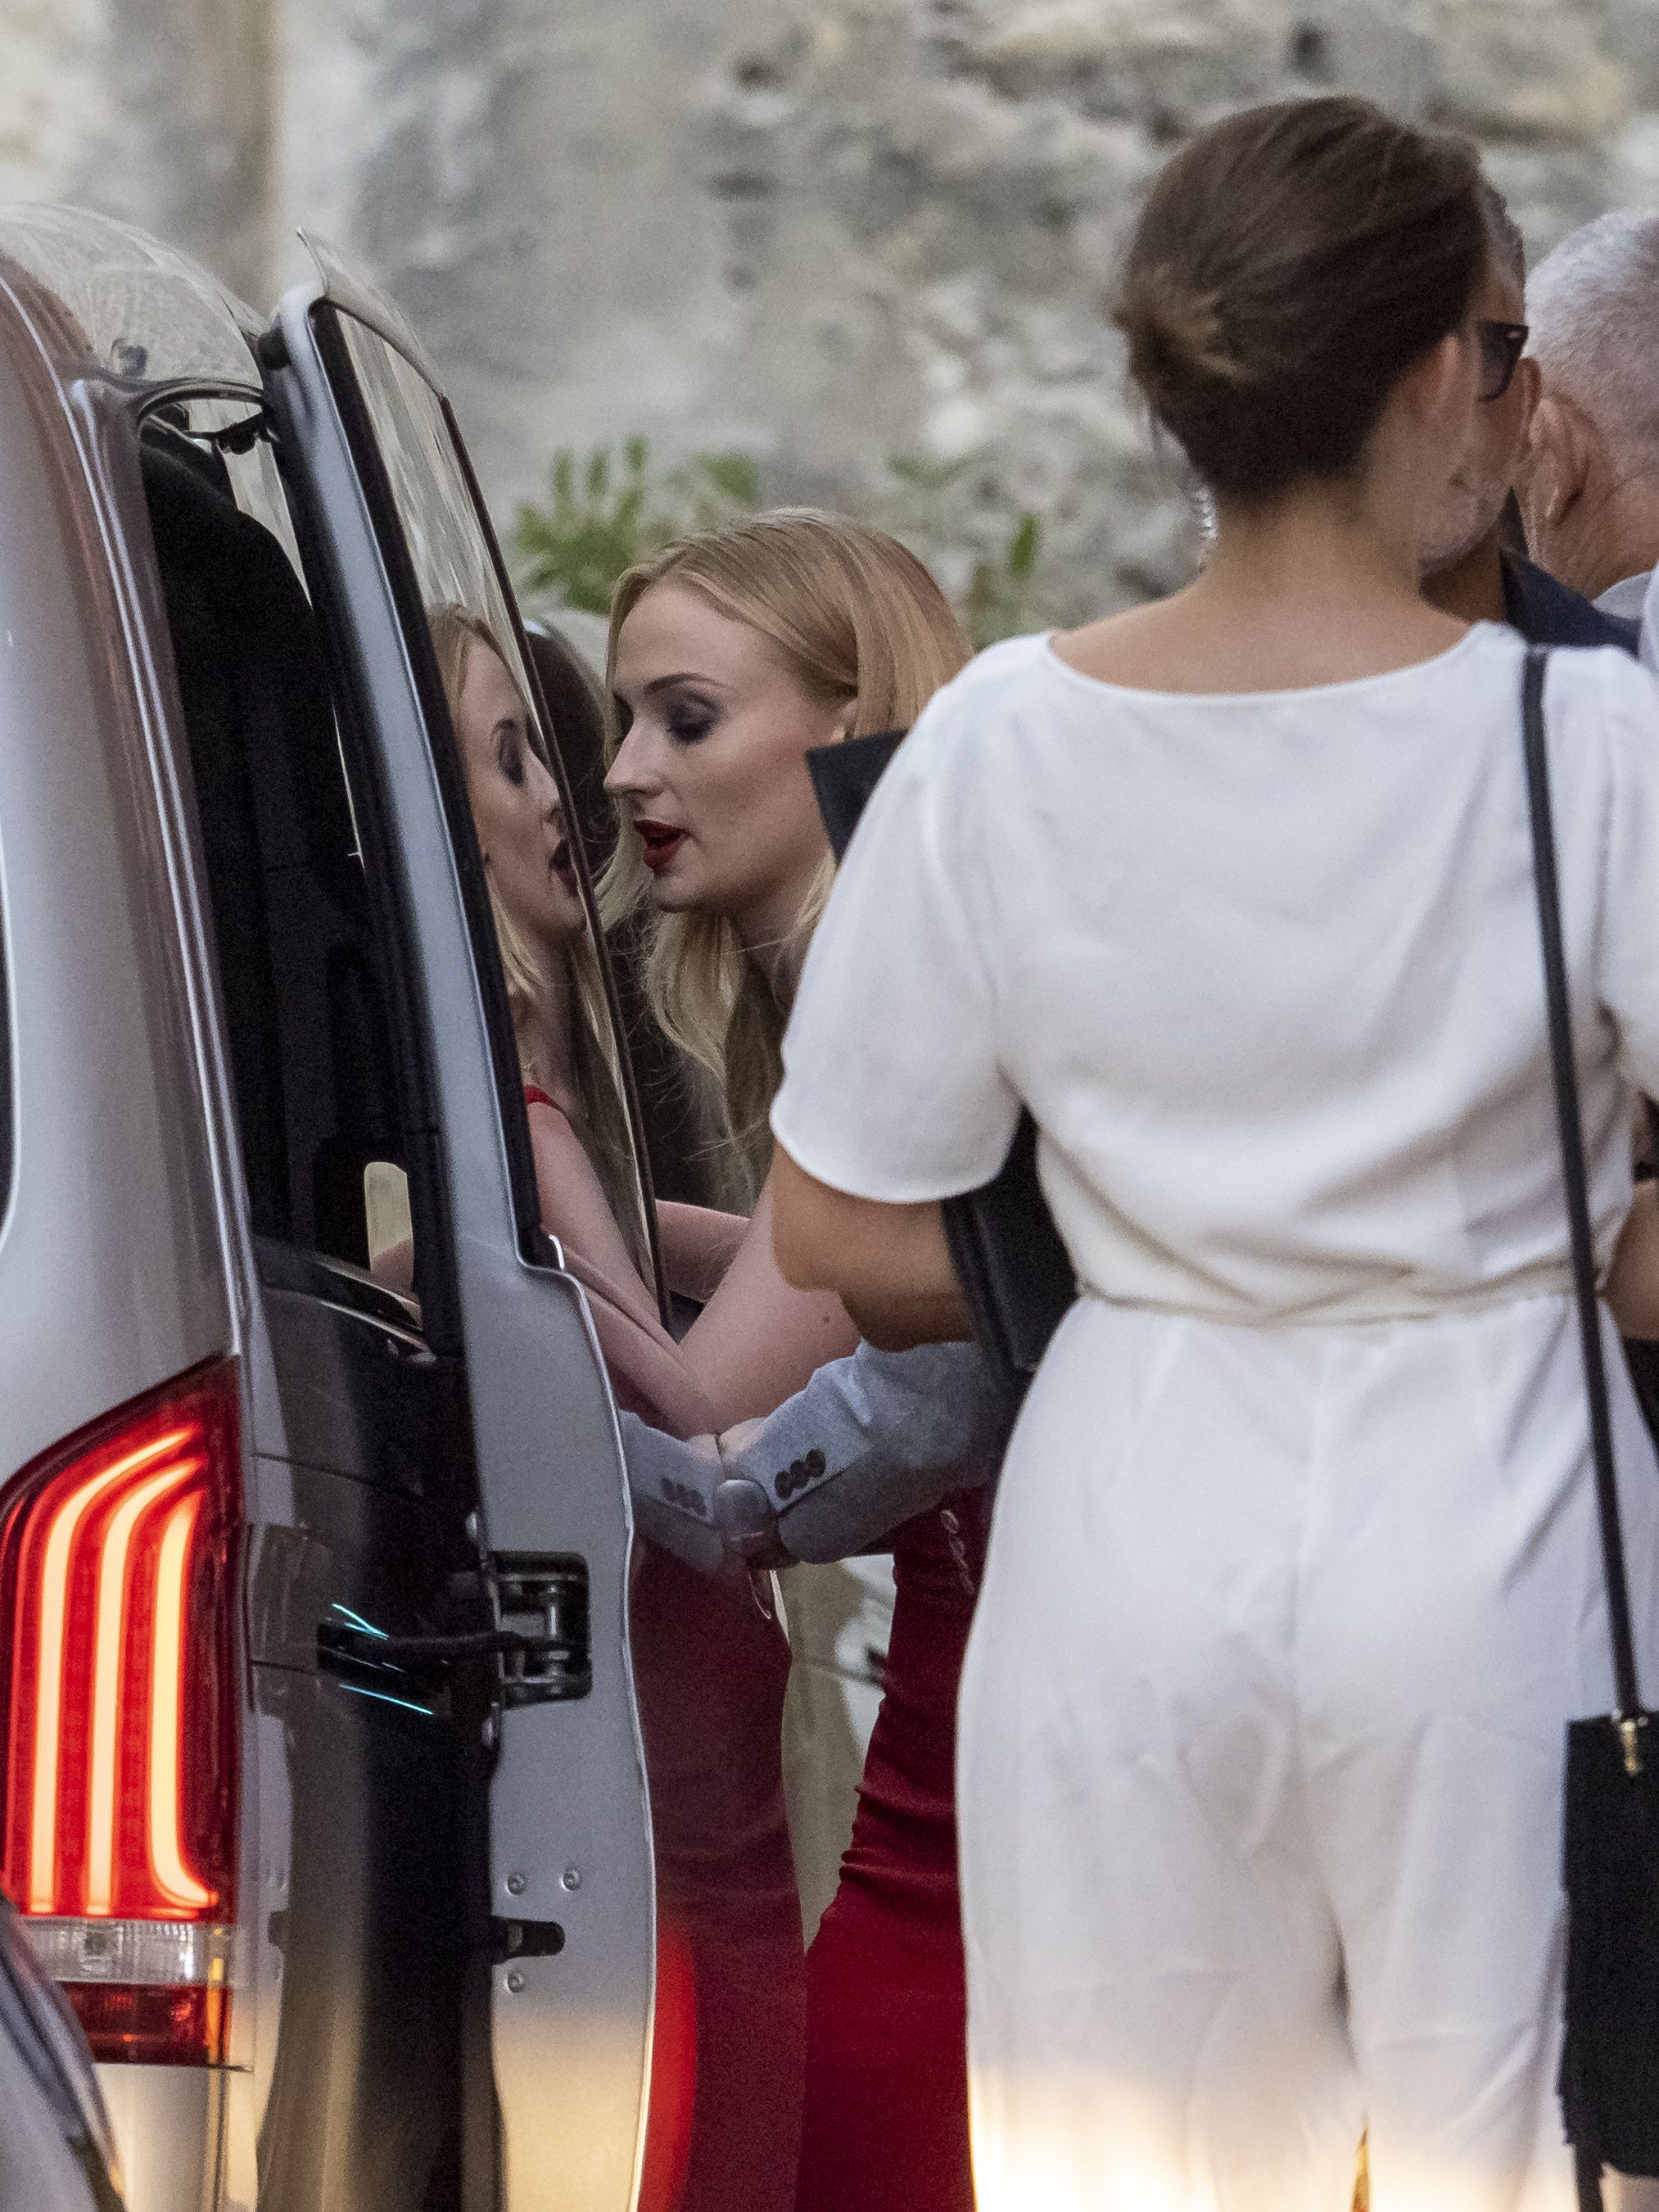 Sophie Turner's wedding dress by Louis Vuitton - new official pictures